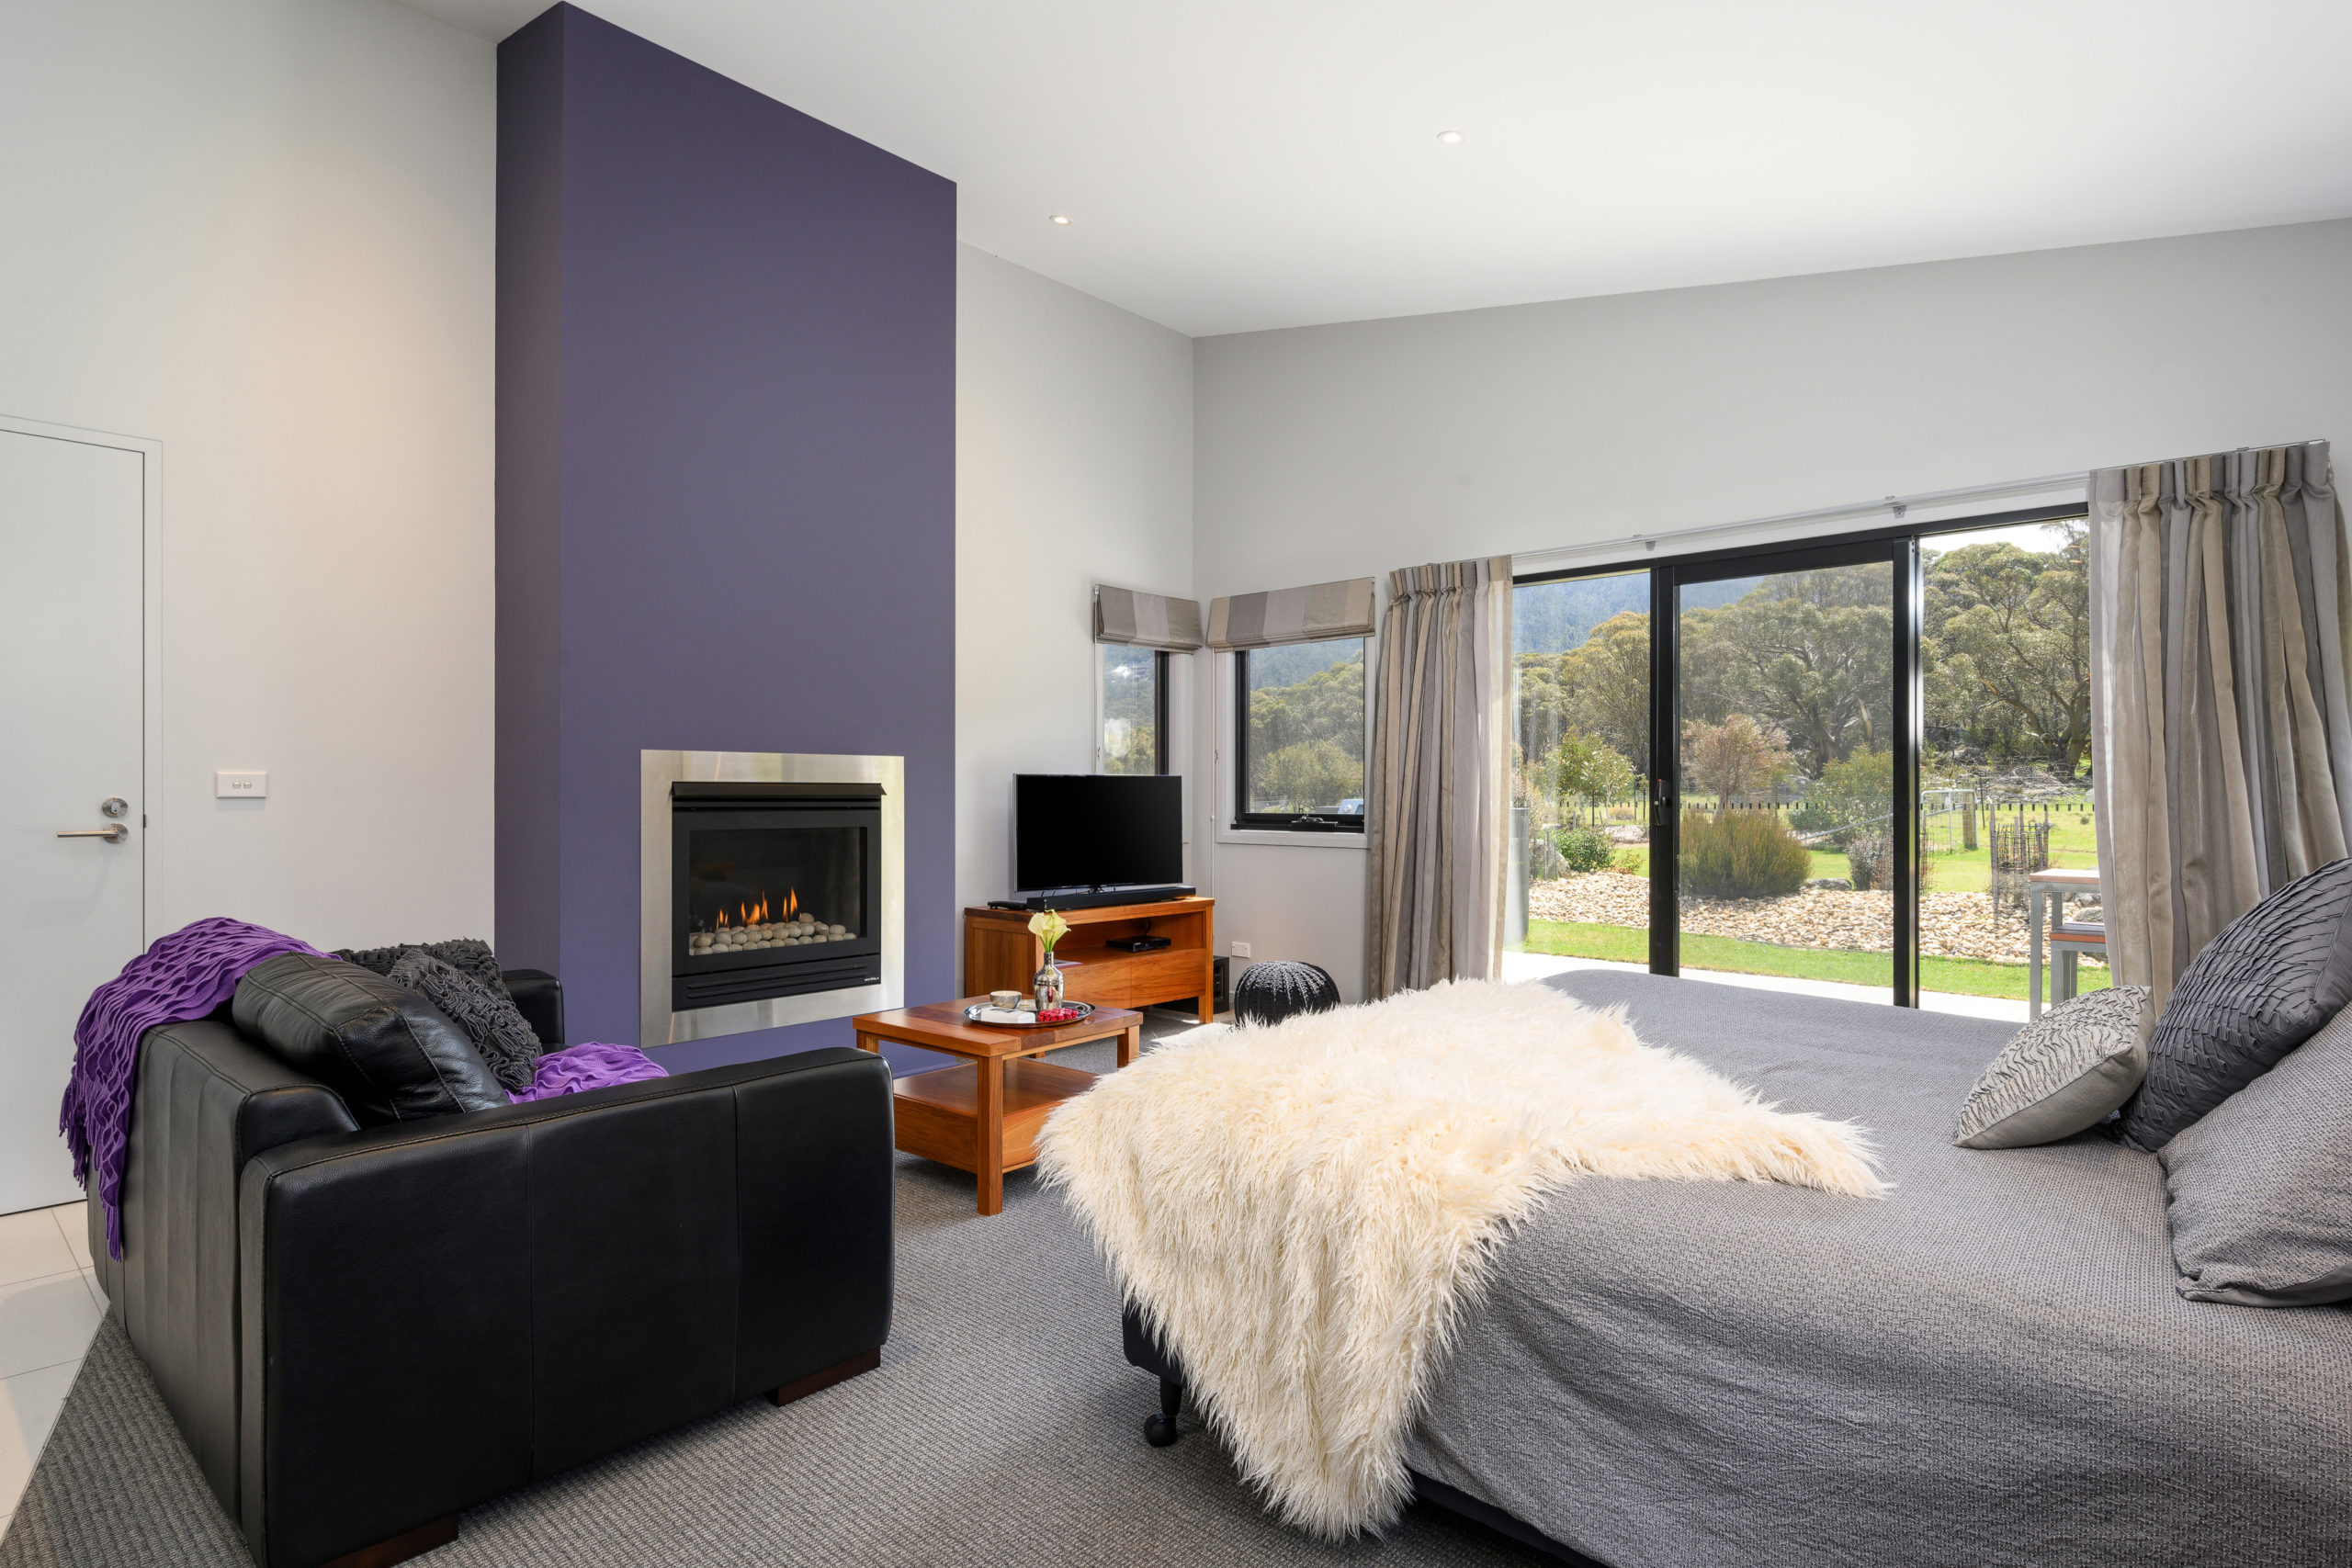 Luxurious, Immaculate Home with Attached Self-Contained Studio in Lake Crackenback – $1,720,000